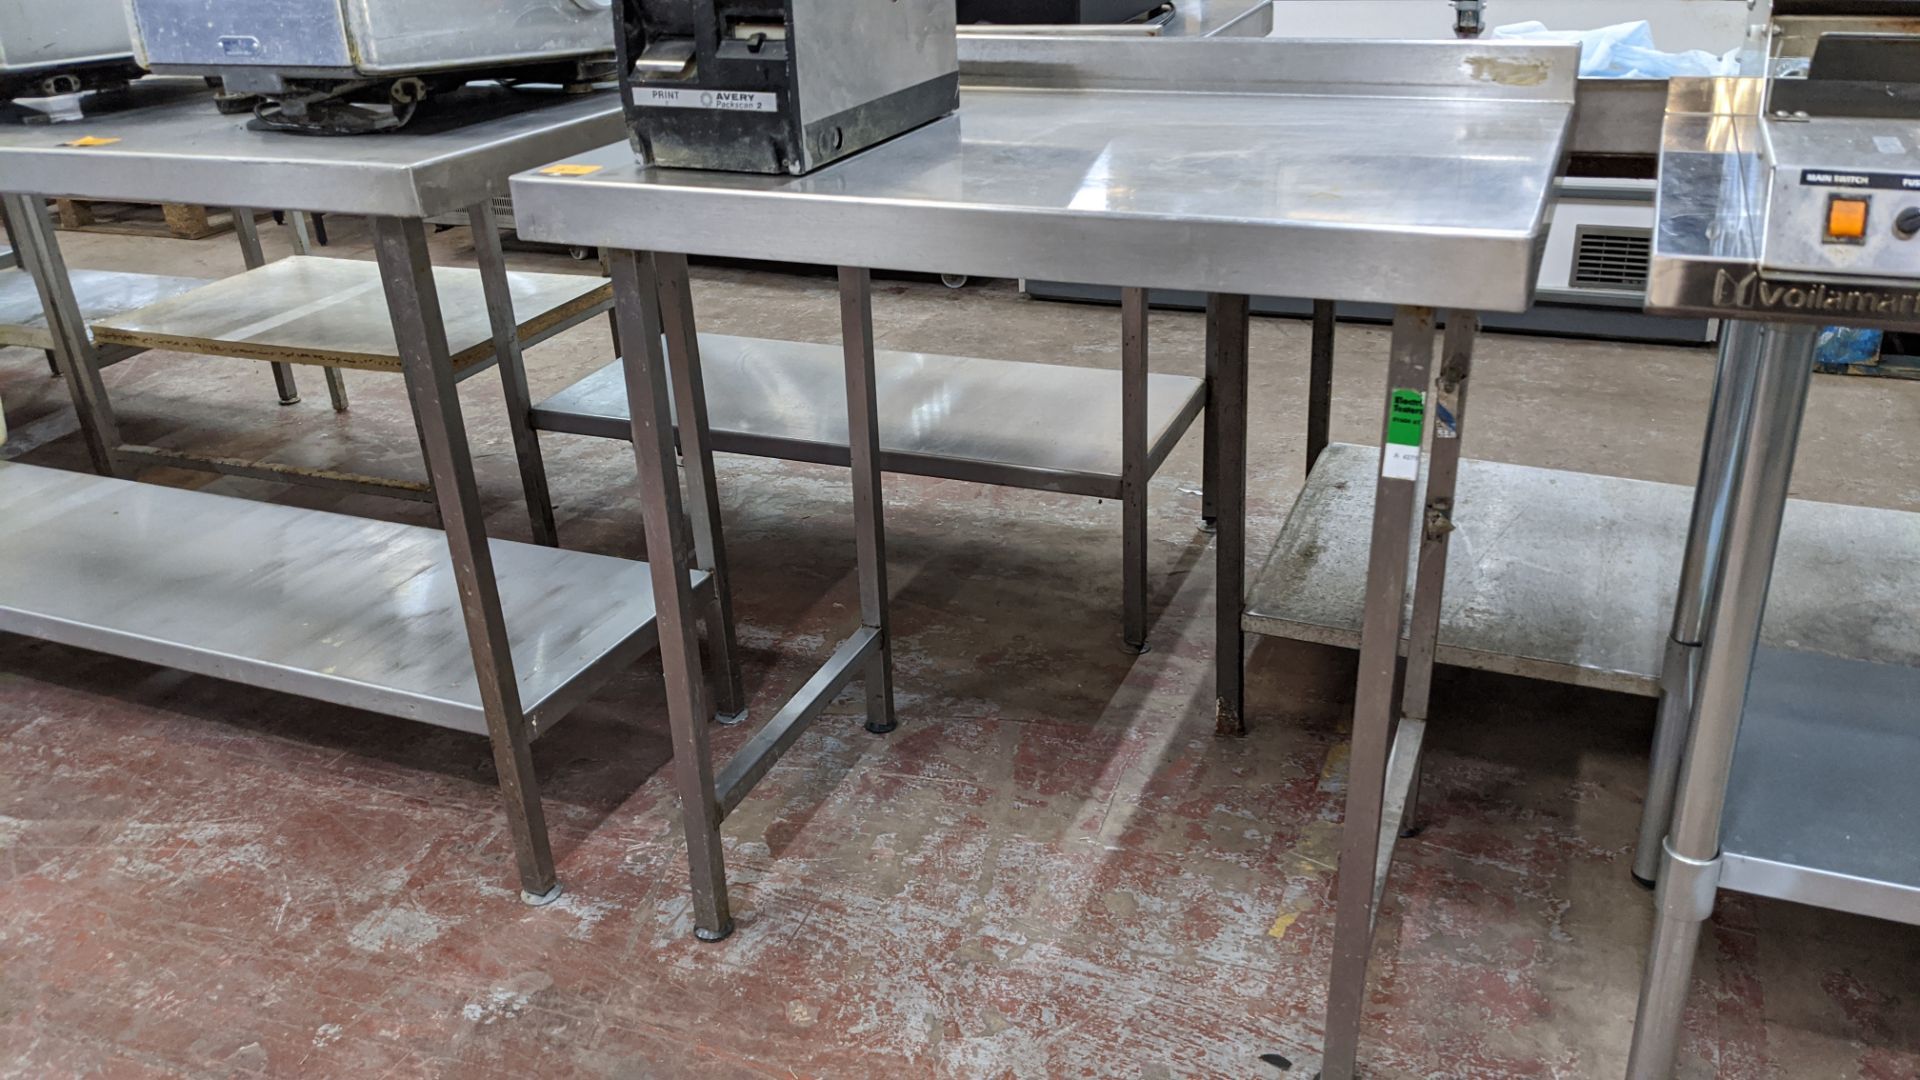 Stainless steel table, table top measuring approximately 900mm x 600mm - Image 3 of 3